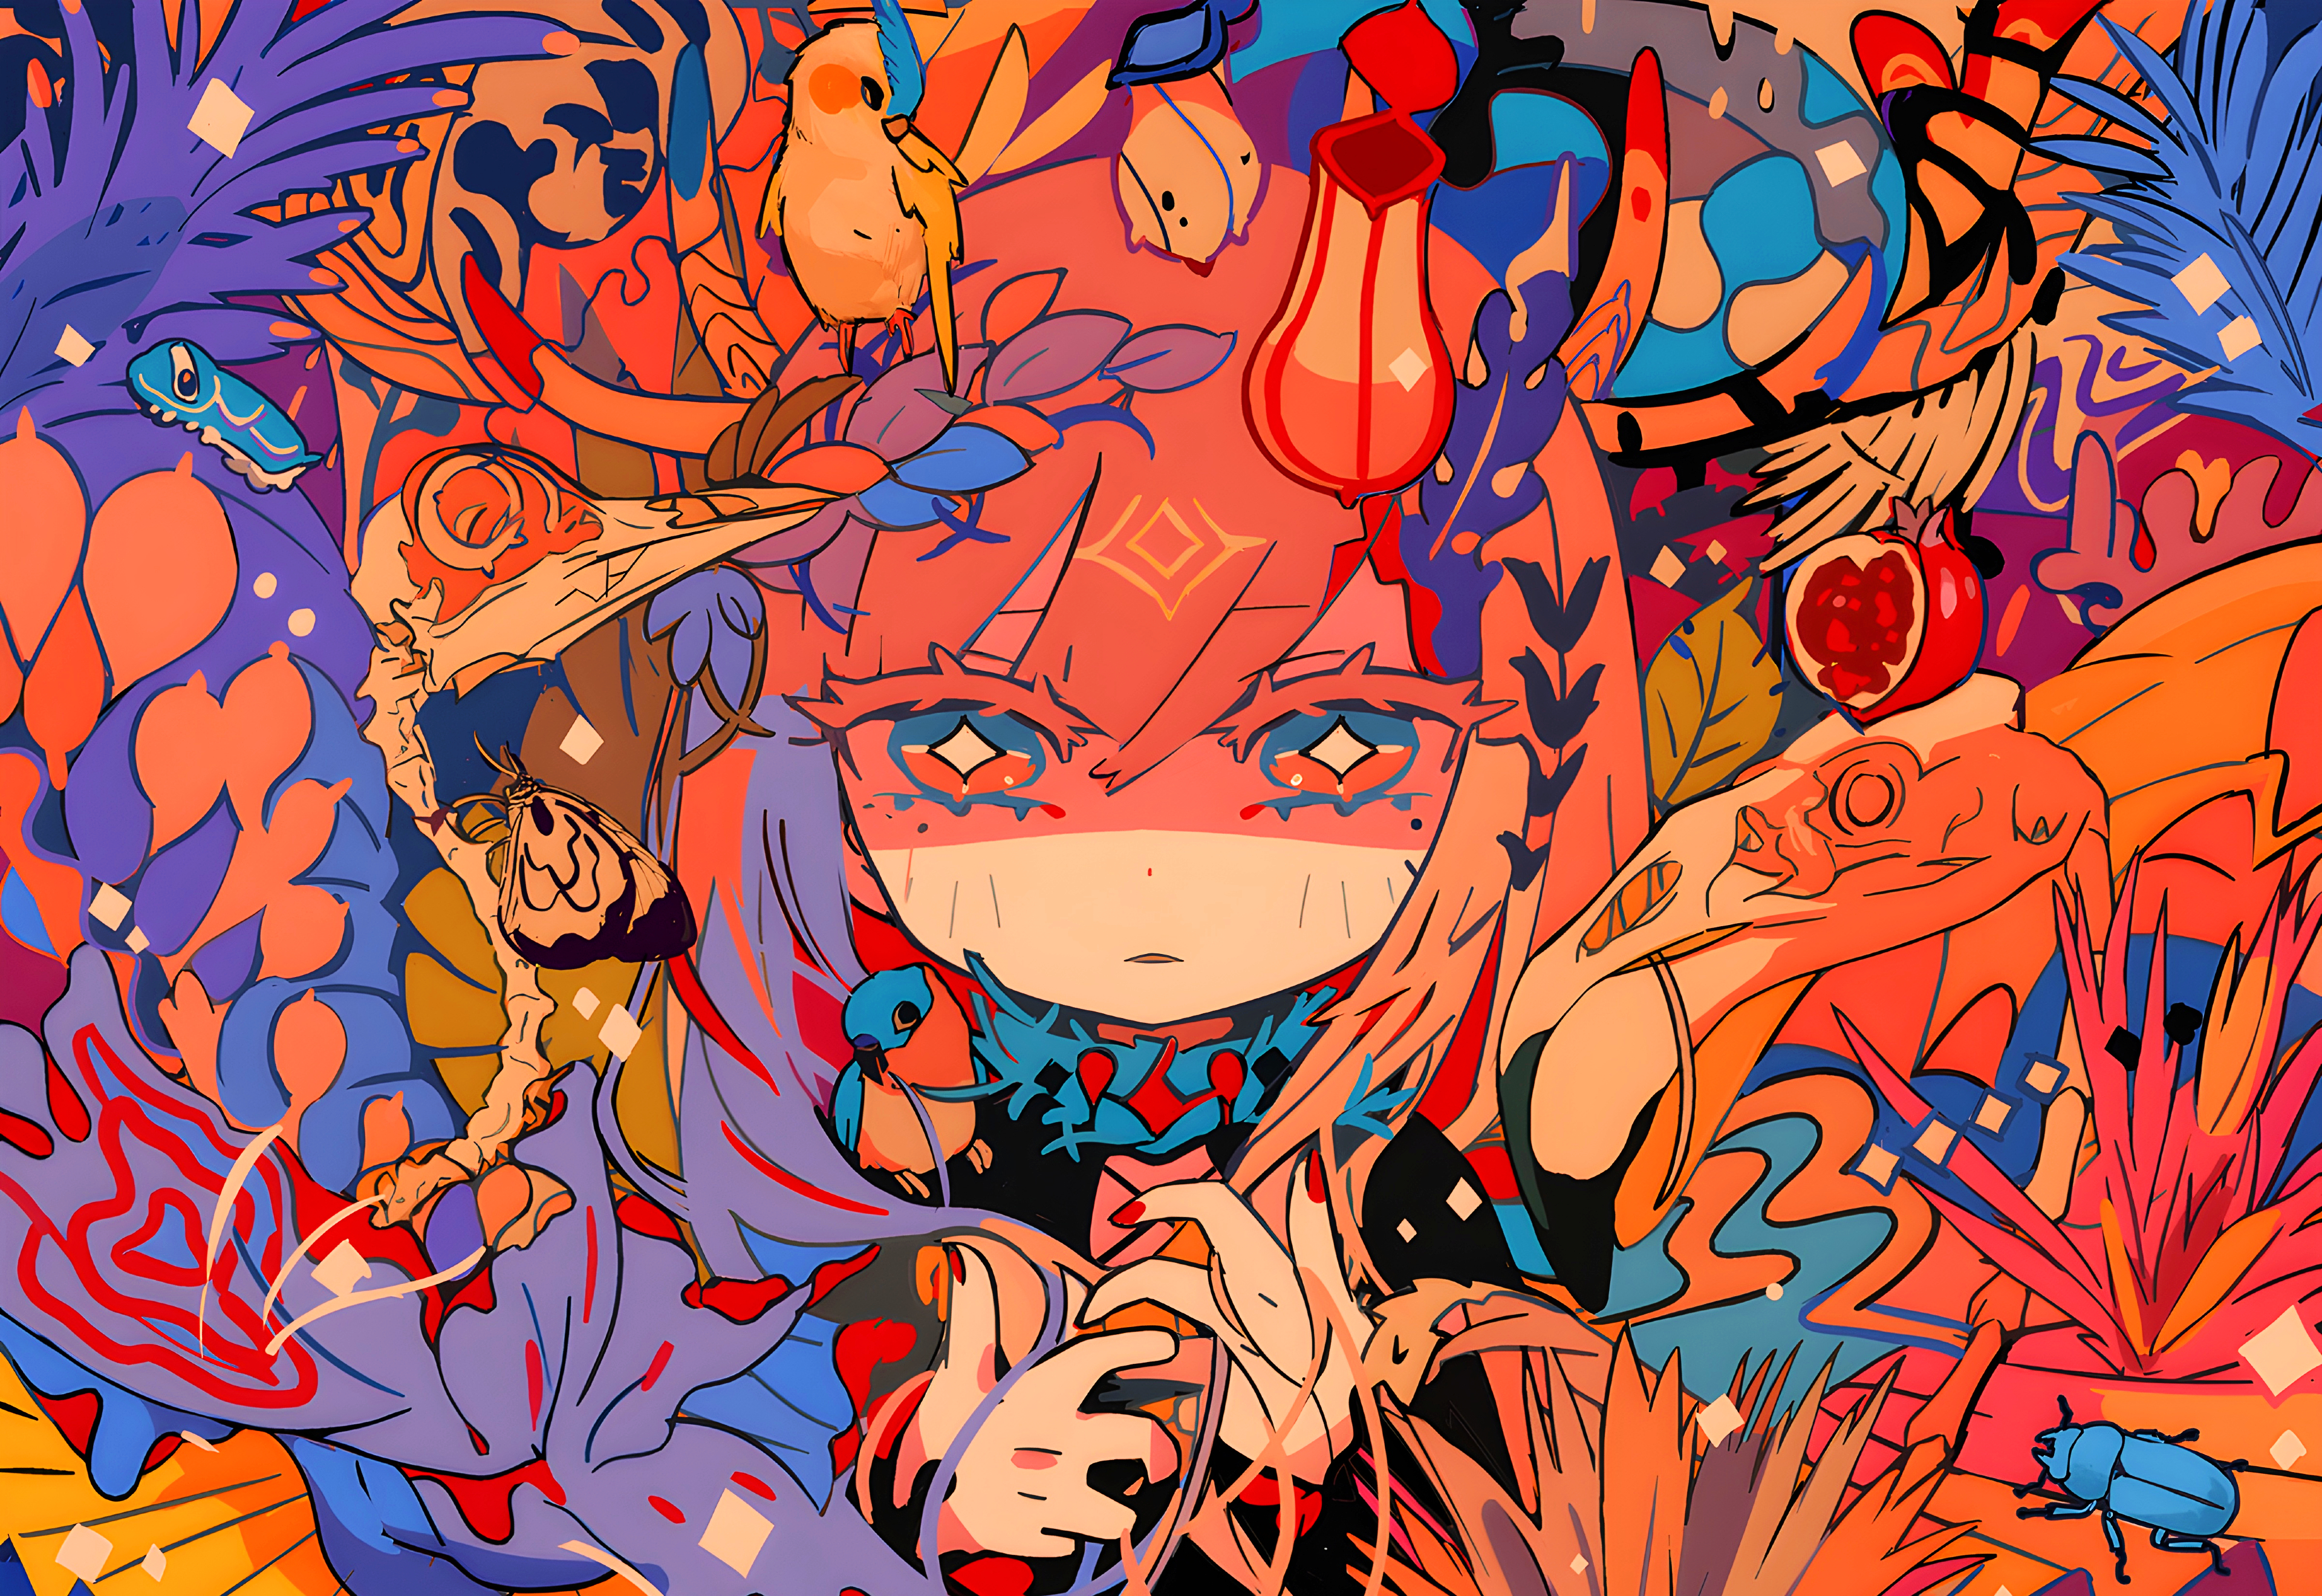 Anime 3840x2640 teracoot 4K illustration anime girls colorful birds fruit insect plants digital art